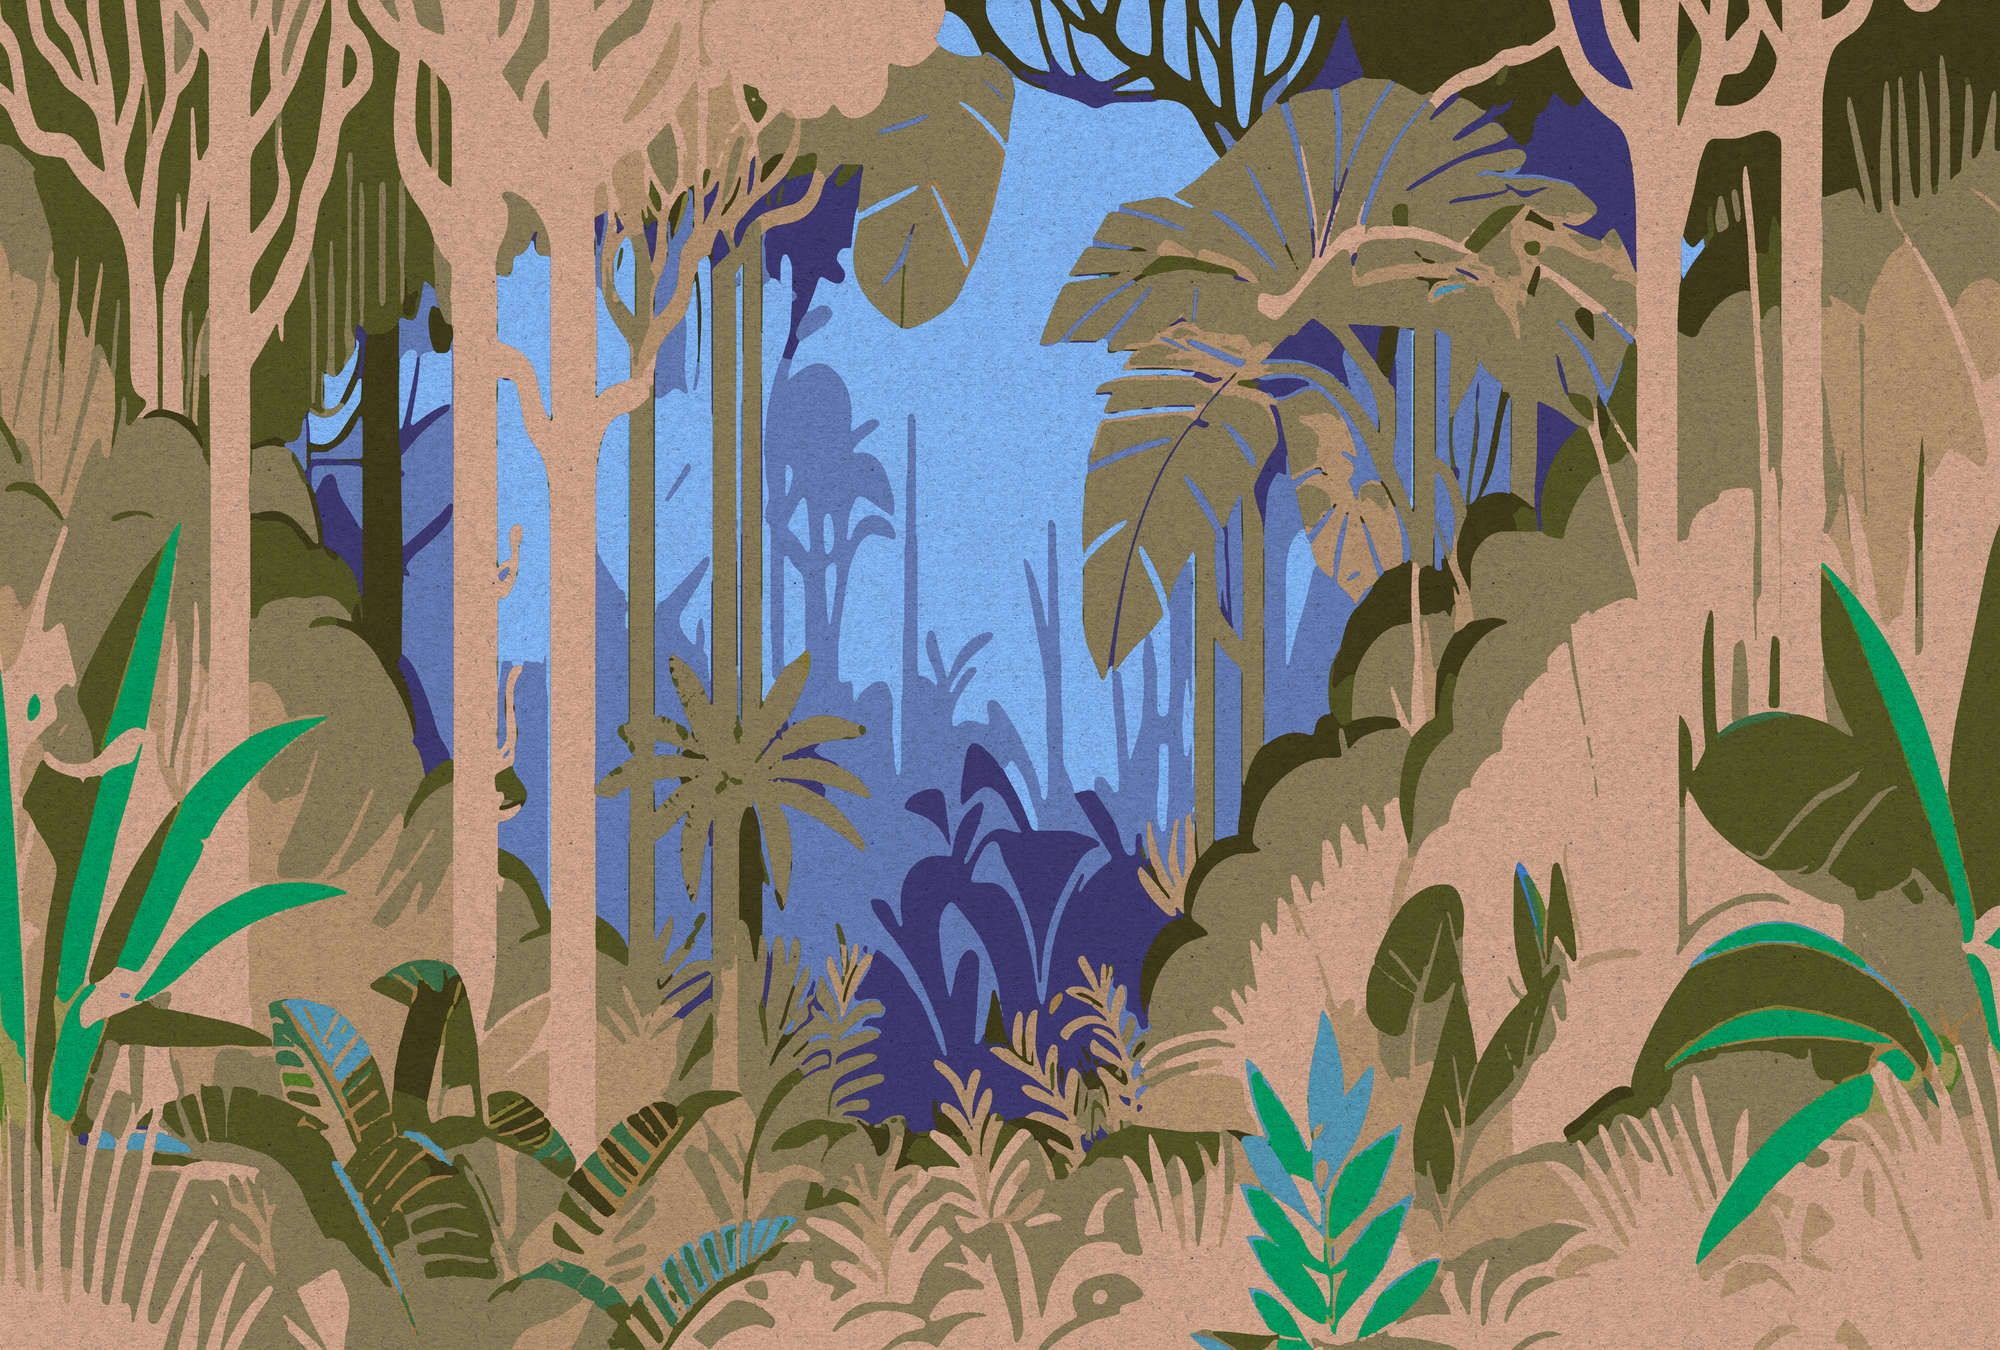             Photo wallpaper »azura« - Abstract jungle motif with kraft paper texture - Smooth, slightly shiny premium non-woven fabric
        